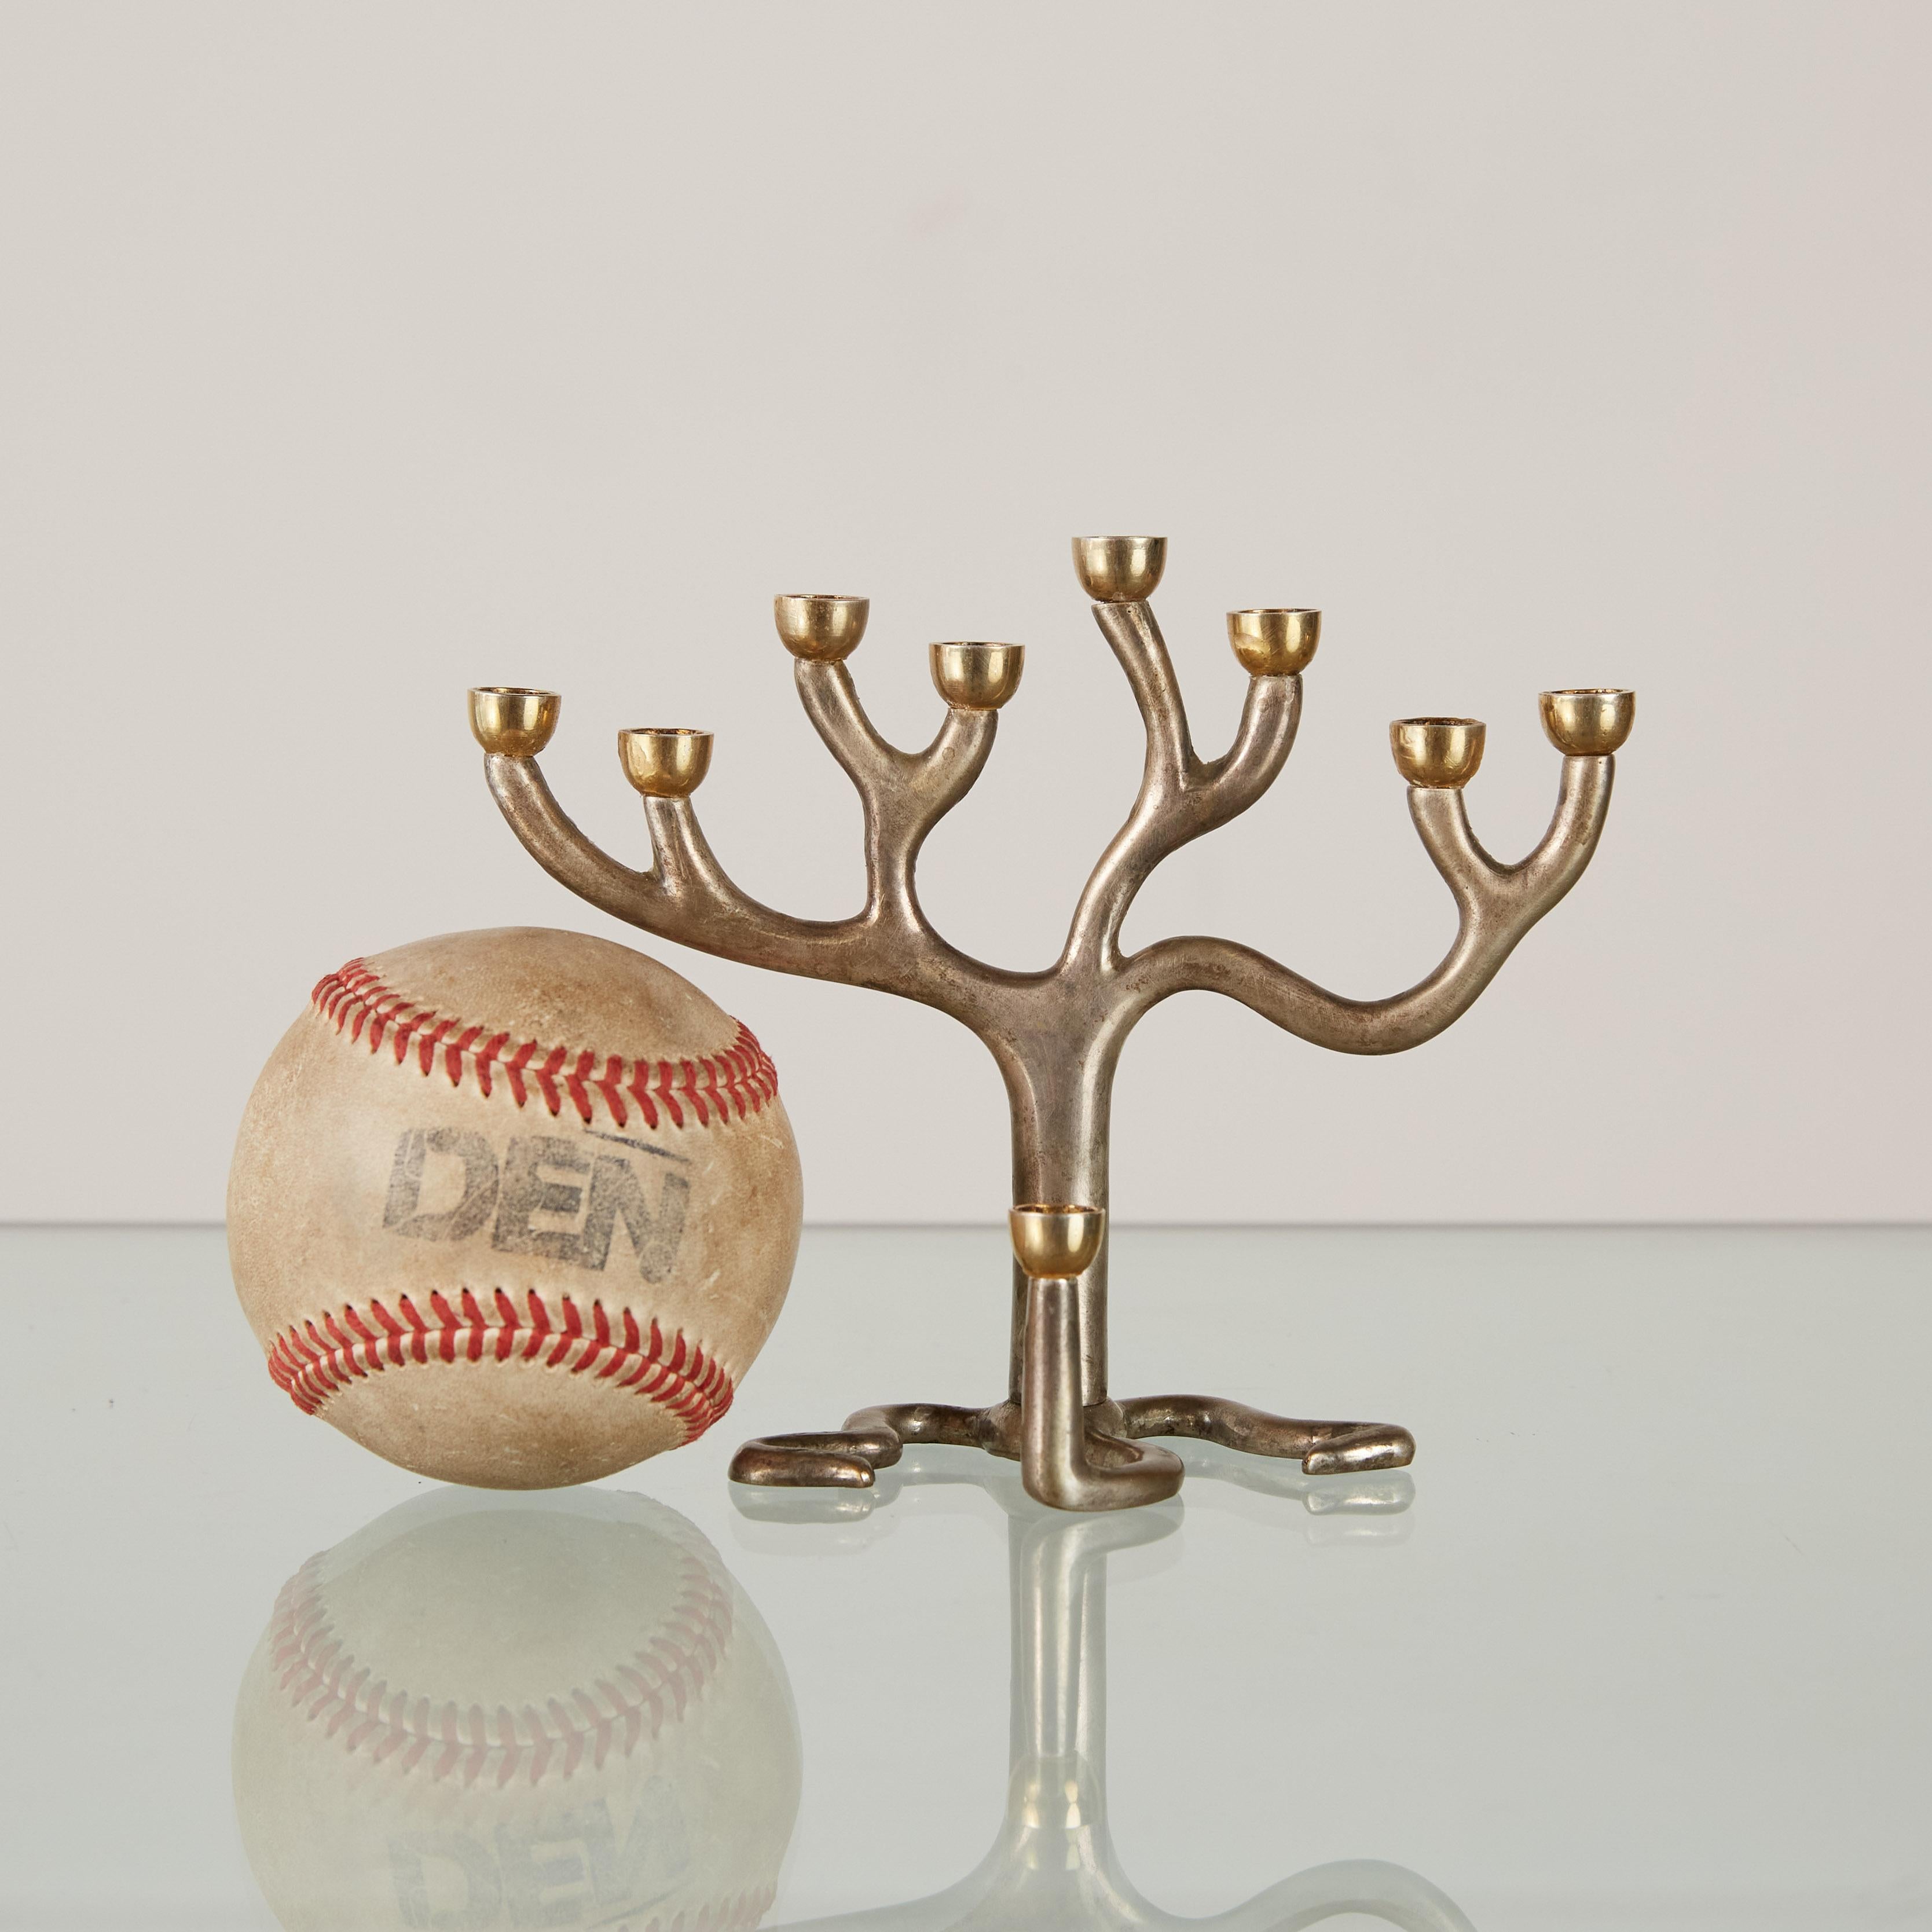 Stunning Menorah designed by Sandra Kravitz for Germany-based Rosenthal specifically for the Judaica Collection. It is made of mixed metals - brass candleholders and a sterling silver base. The design references 